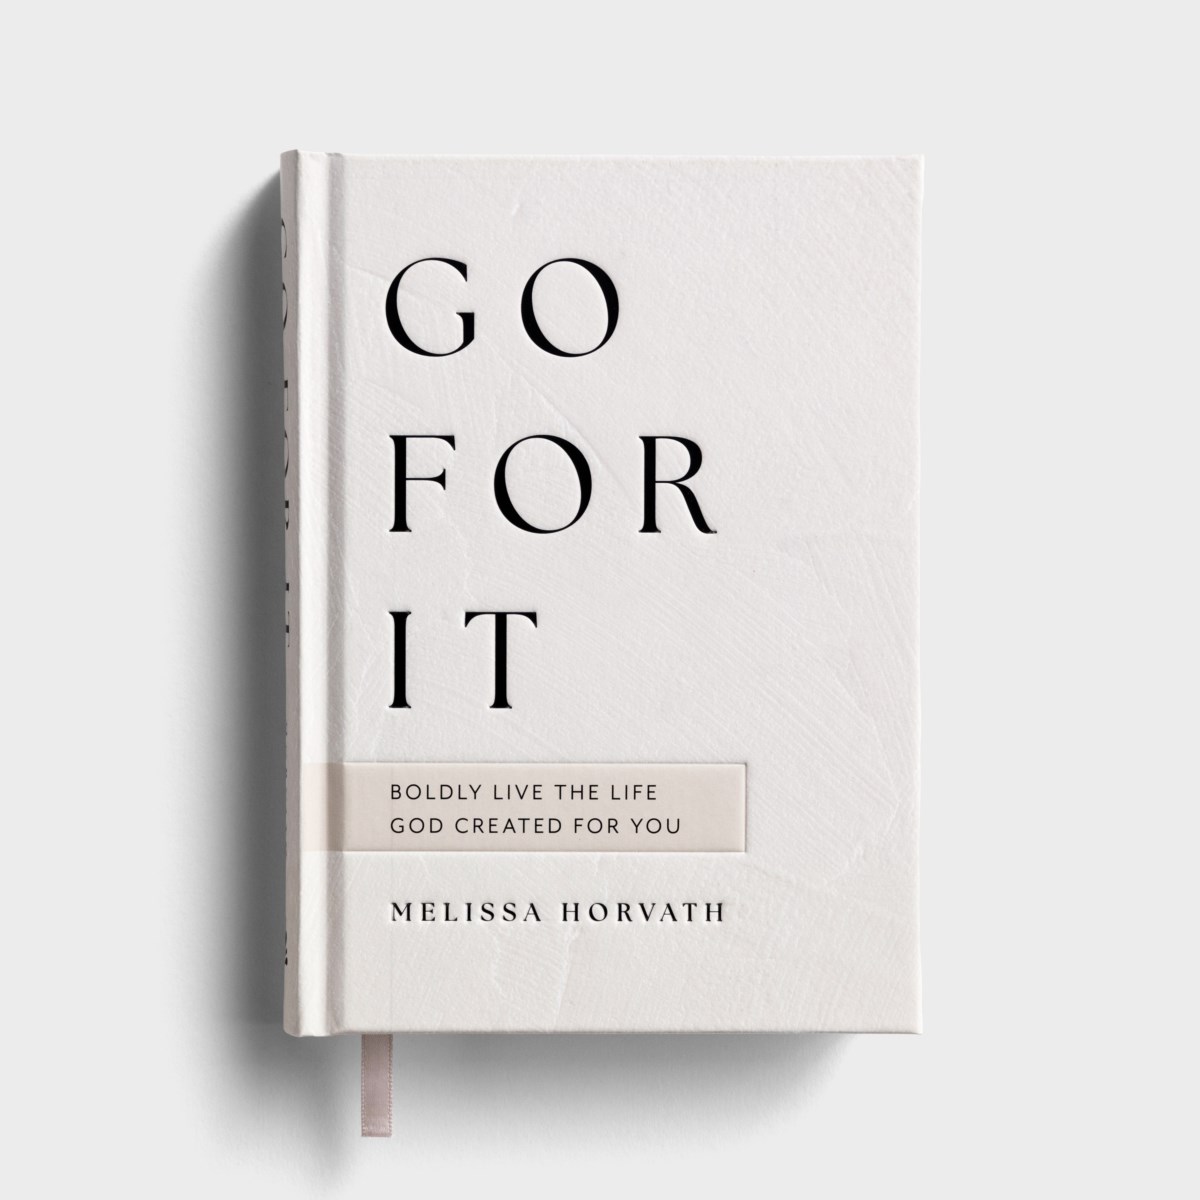  Melissa Horvath - Go For It! Boldly Live the Life God Created for You